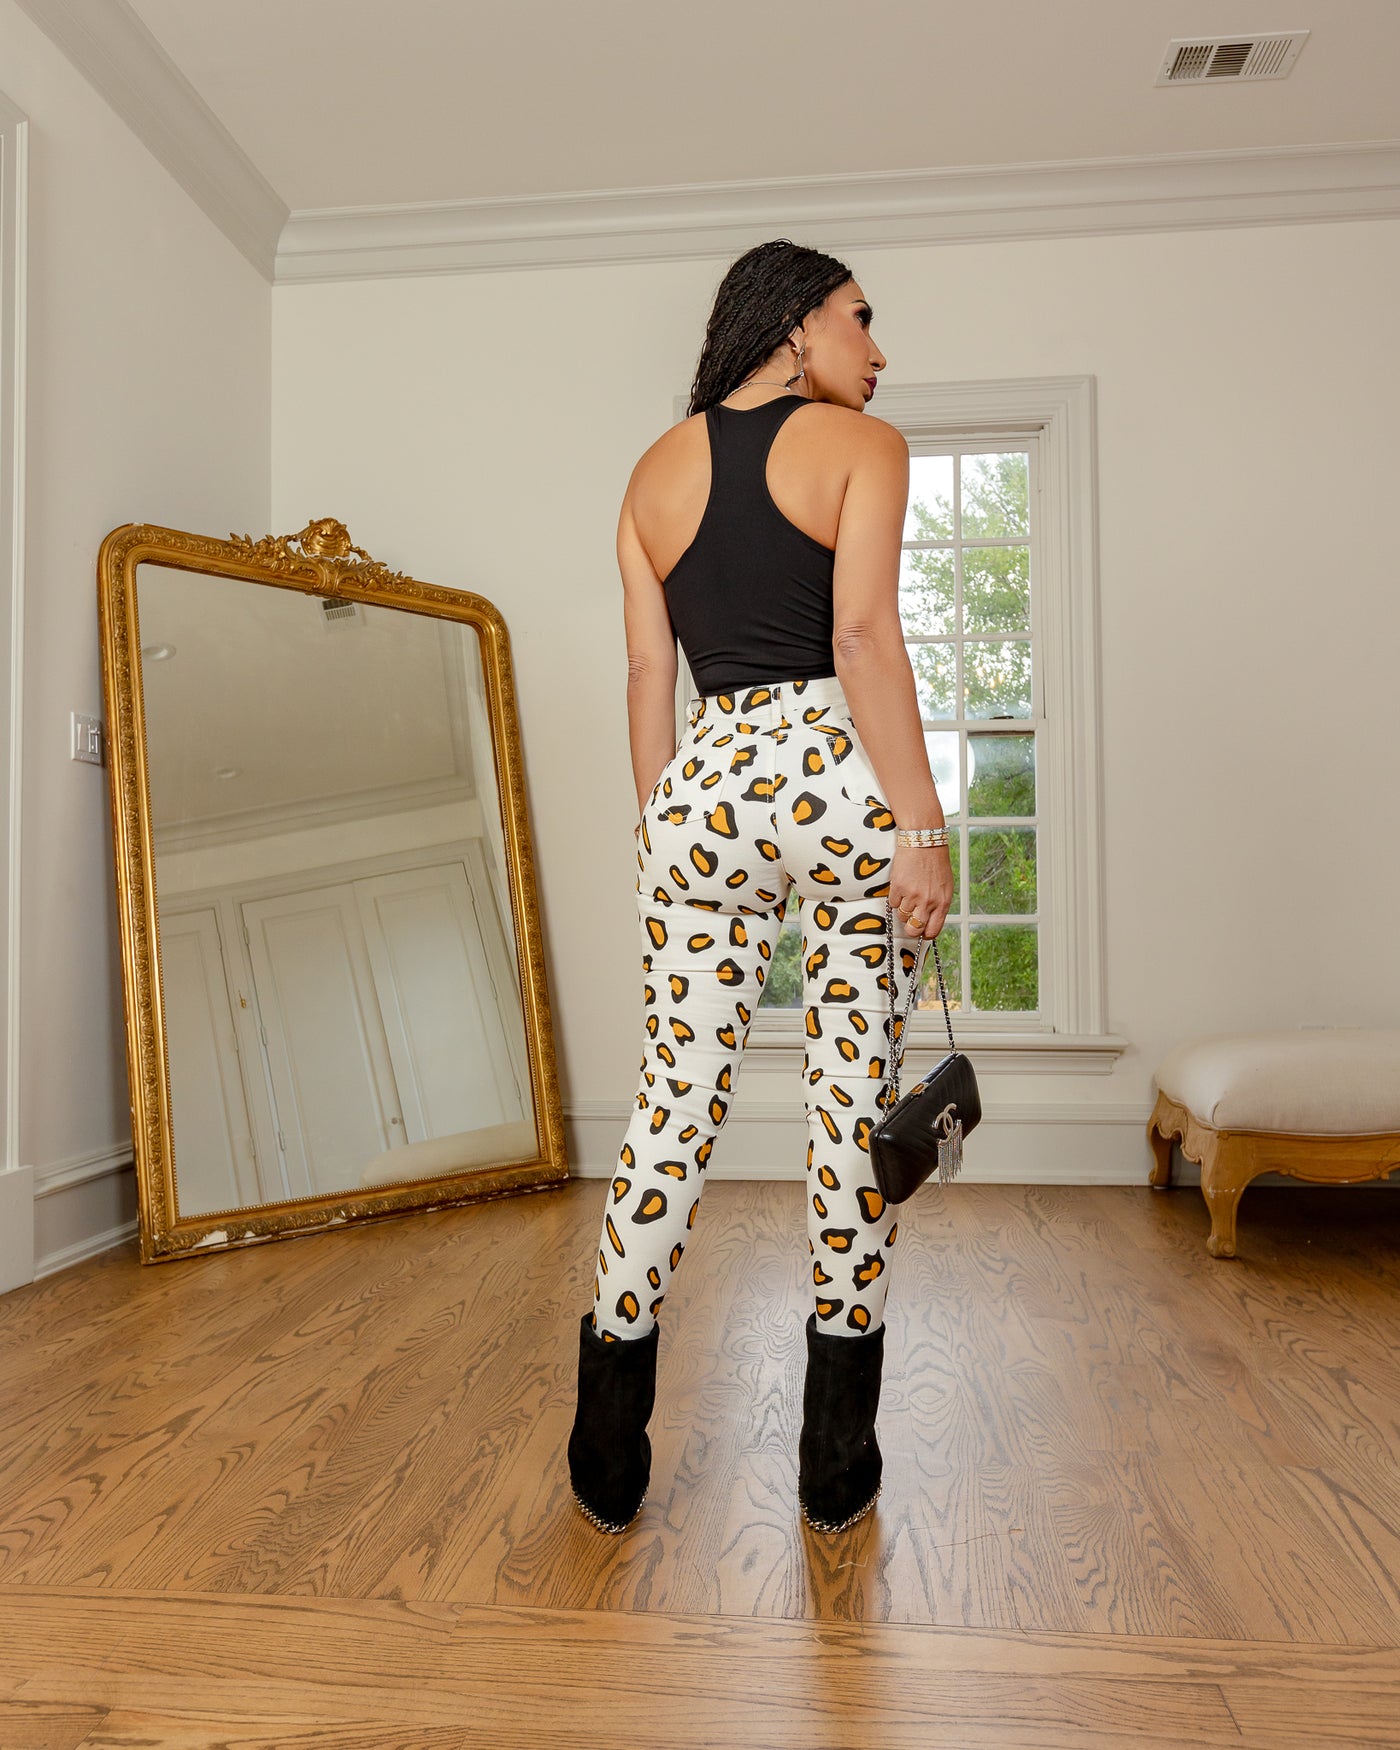 Hyena (White Leopard Print Jeans) ALL SALE ITEMS ARE A FINAL SALE NO EXCHANGE